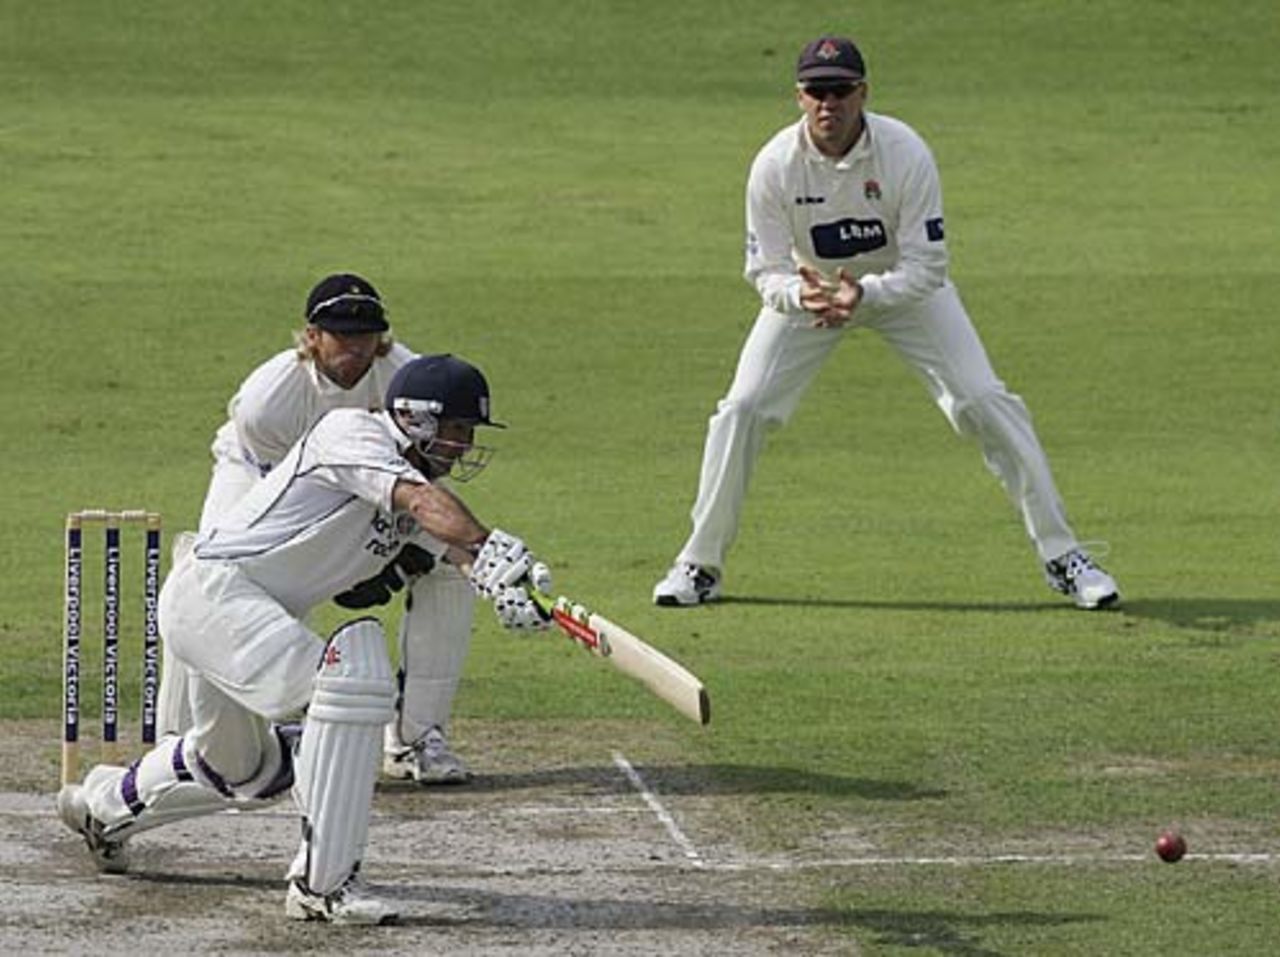 Jimmy Maher punches one through the covers, Lancashire v Durham, County Championship, Old Trafford, September 13, 2006